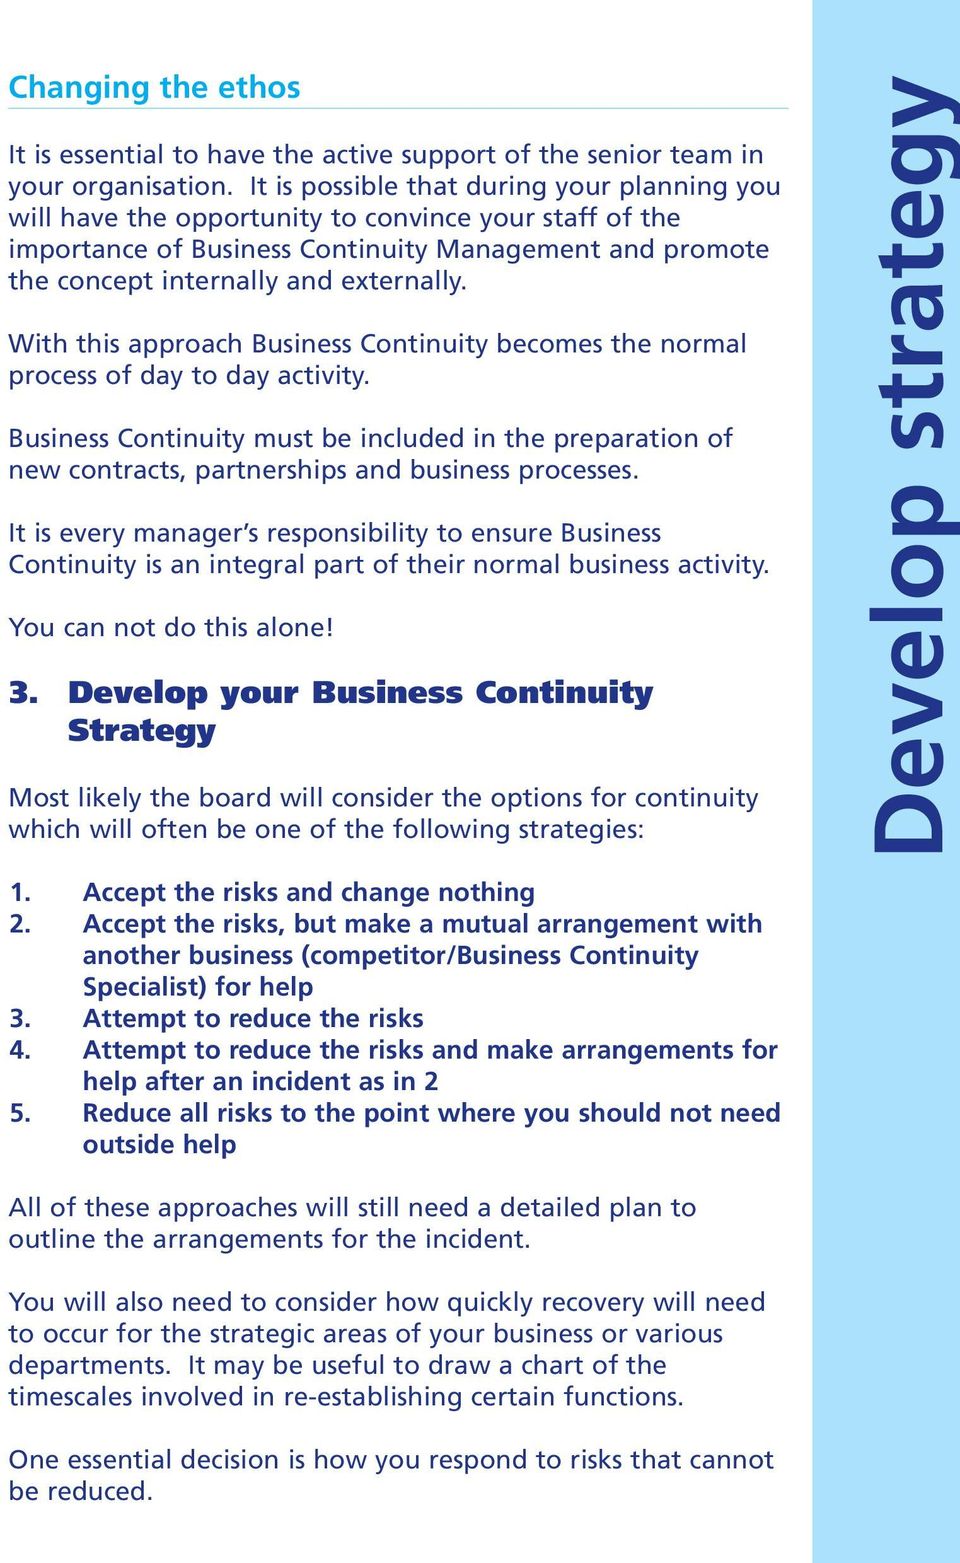 With this approach Business Continuity becomes the normal process of day to day activity. Business Continuity must be included in the preparation of new contracts, partnerships and business processes.